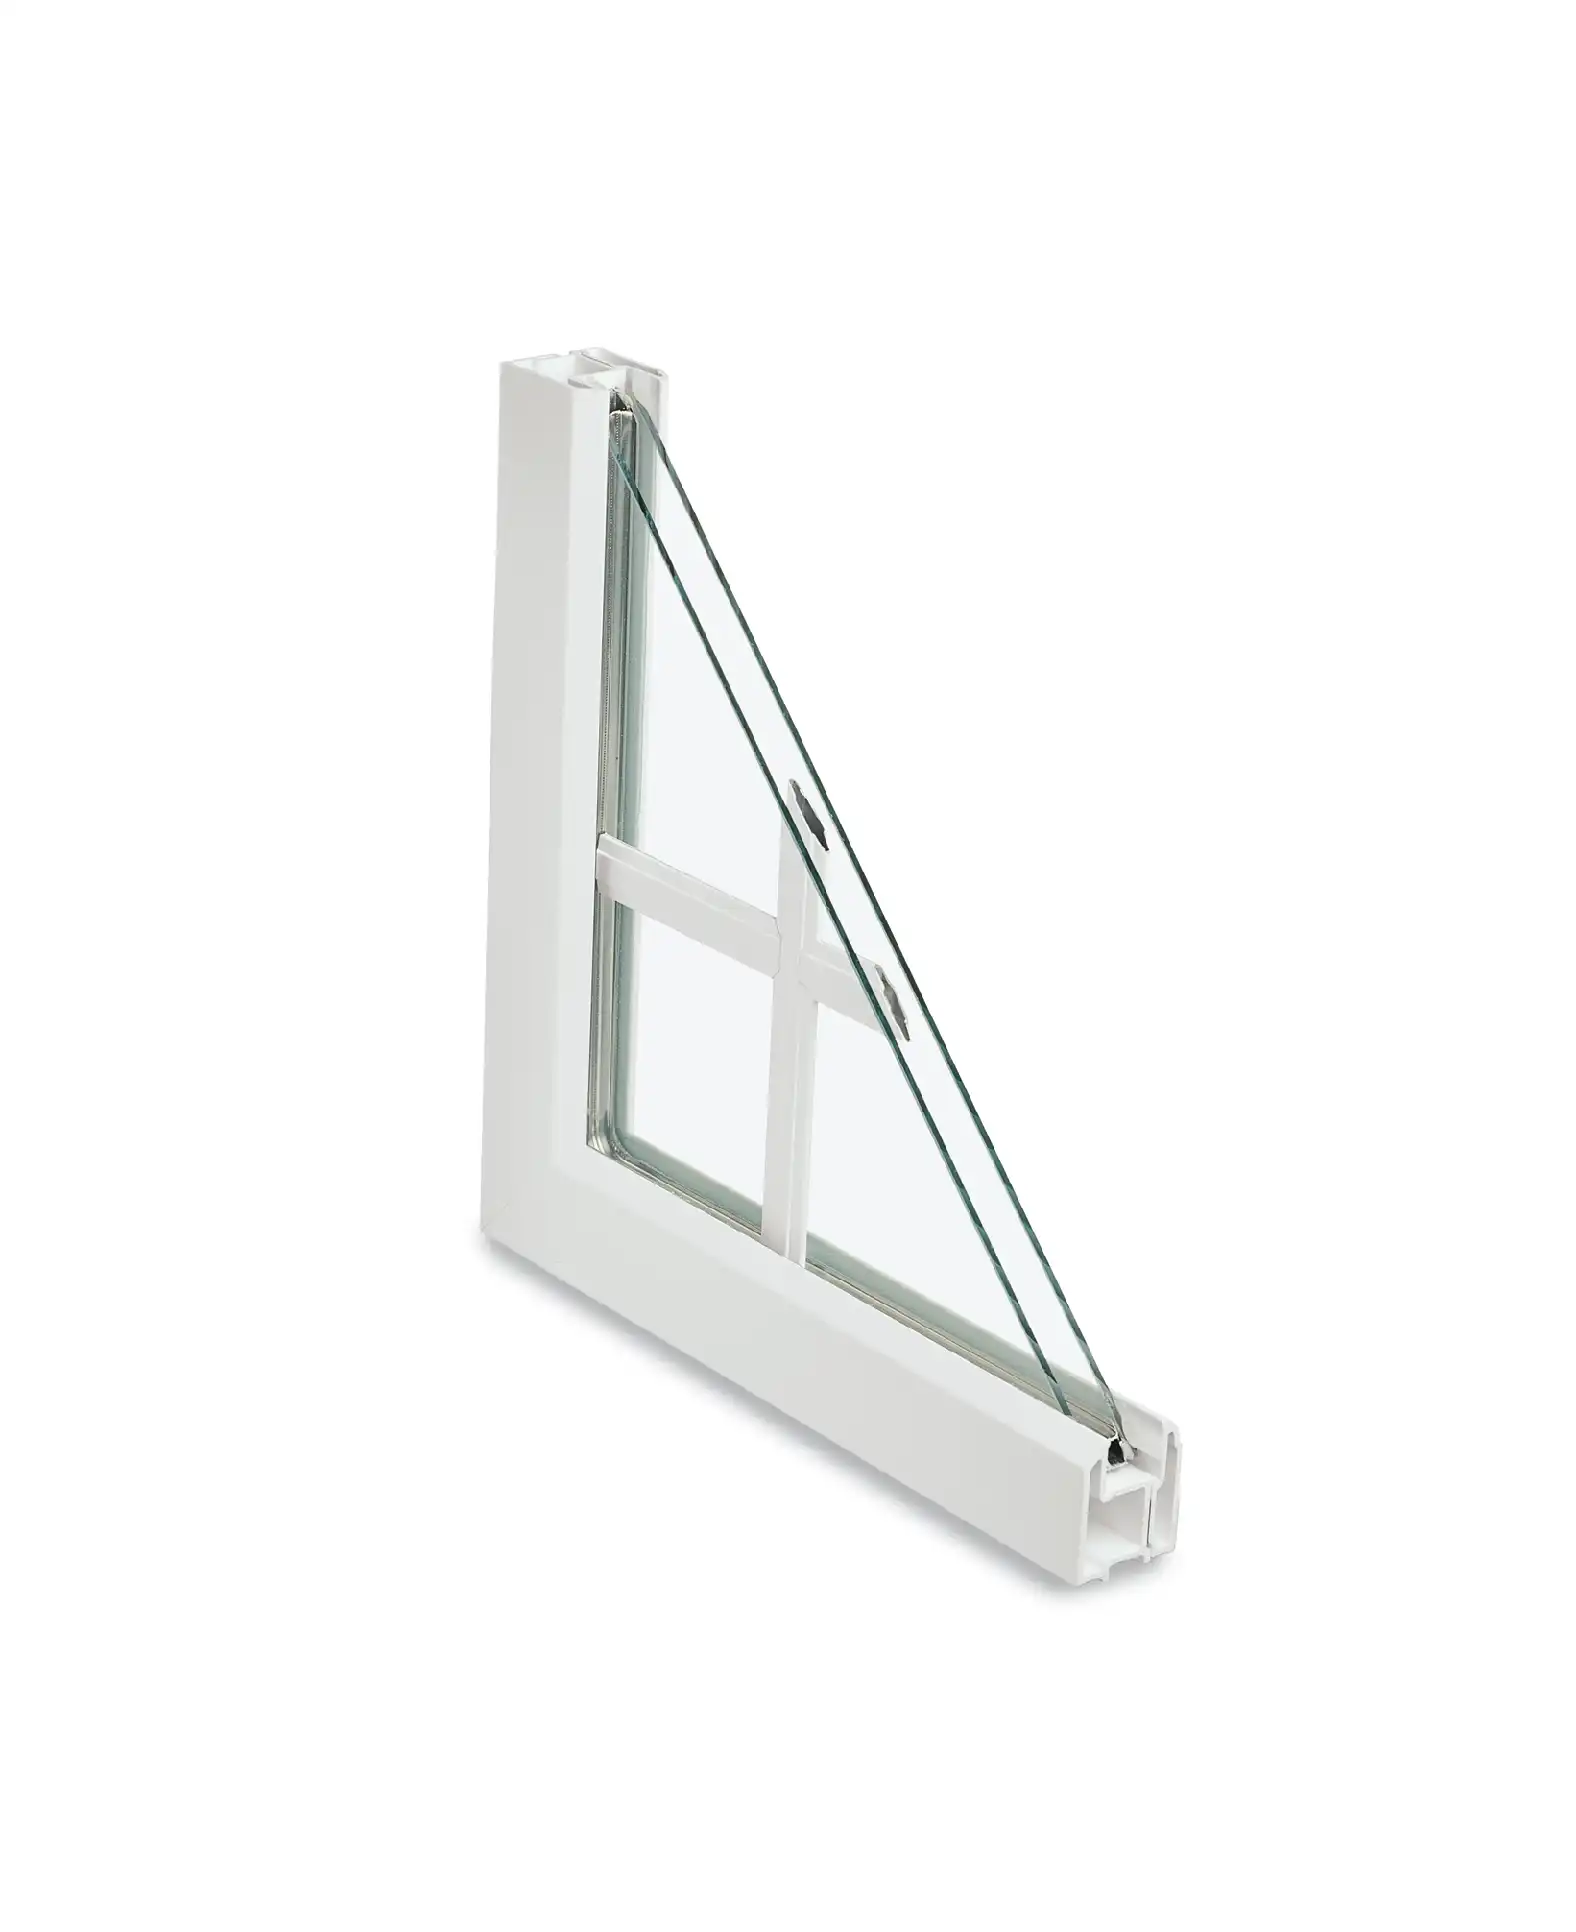 https://a.storyblok.com/f/127606/1576x1932/443836b90c/marvin-replacement-grilles-between-the-glass.webp